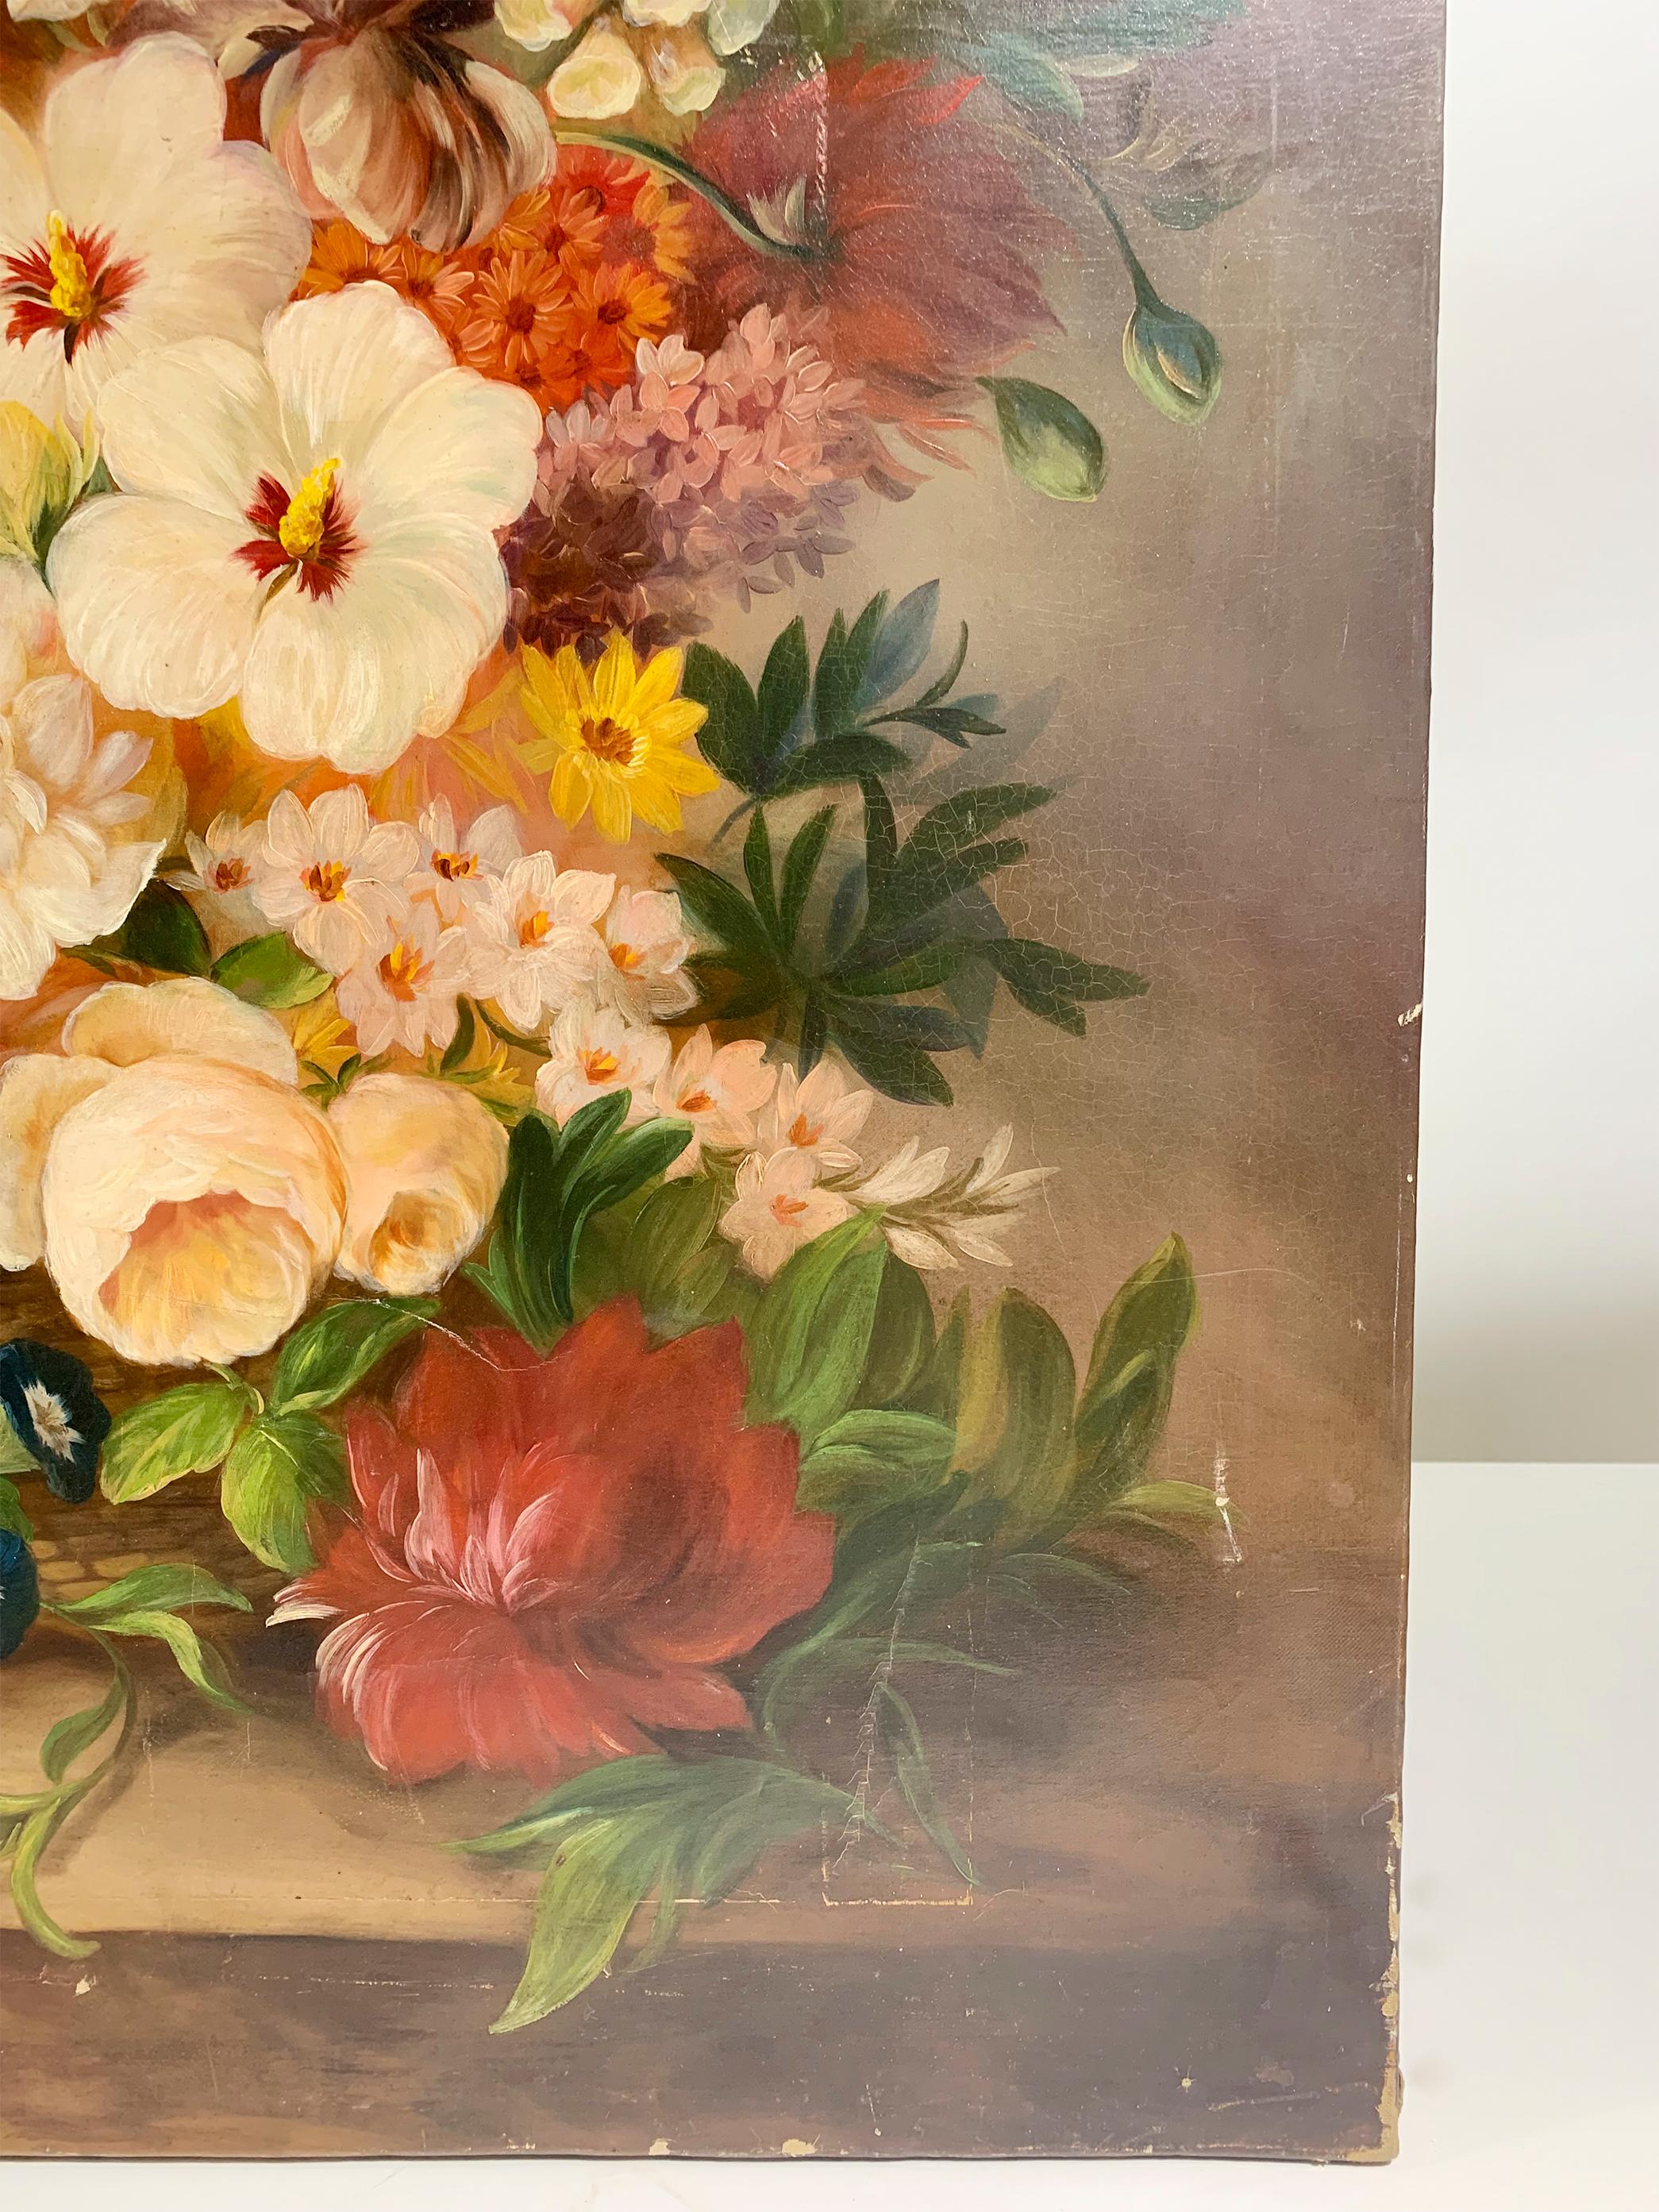 19th Century Floral Still Life Painting - Oil on Canvas - Signed Anne Maurin For Sale 3